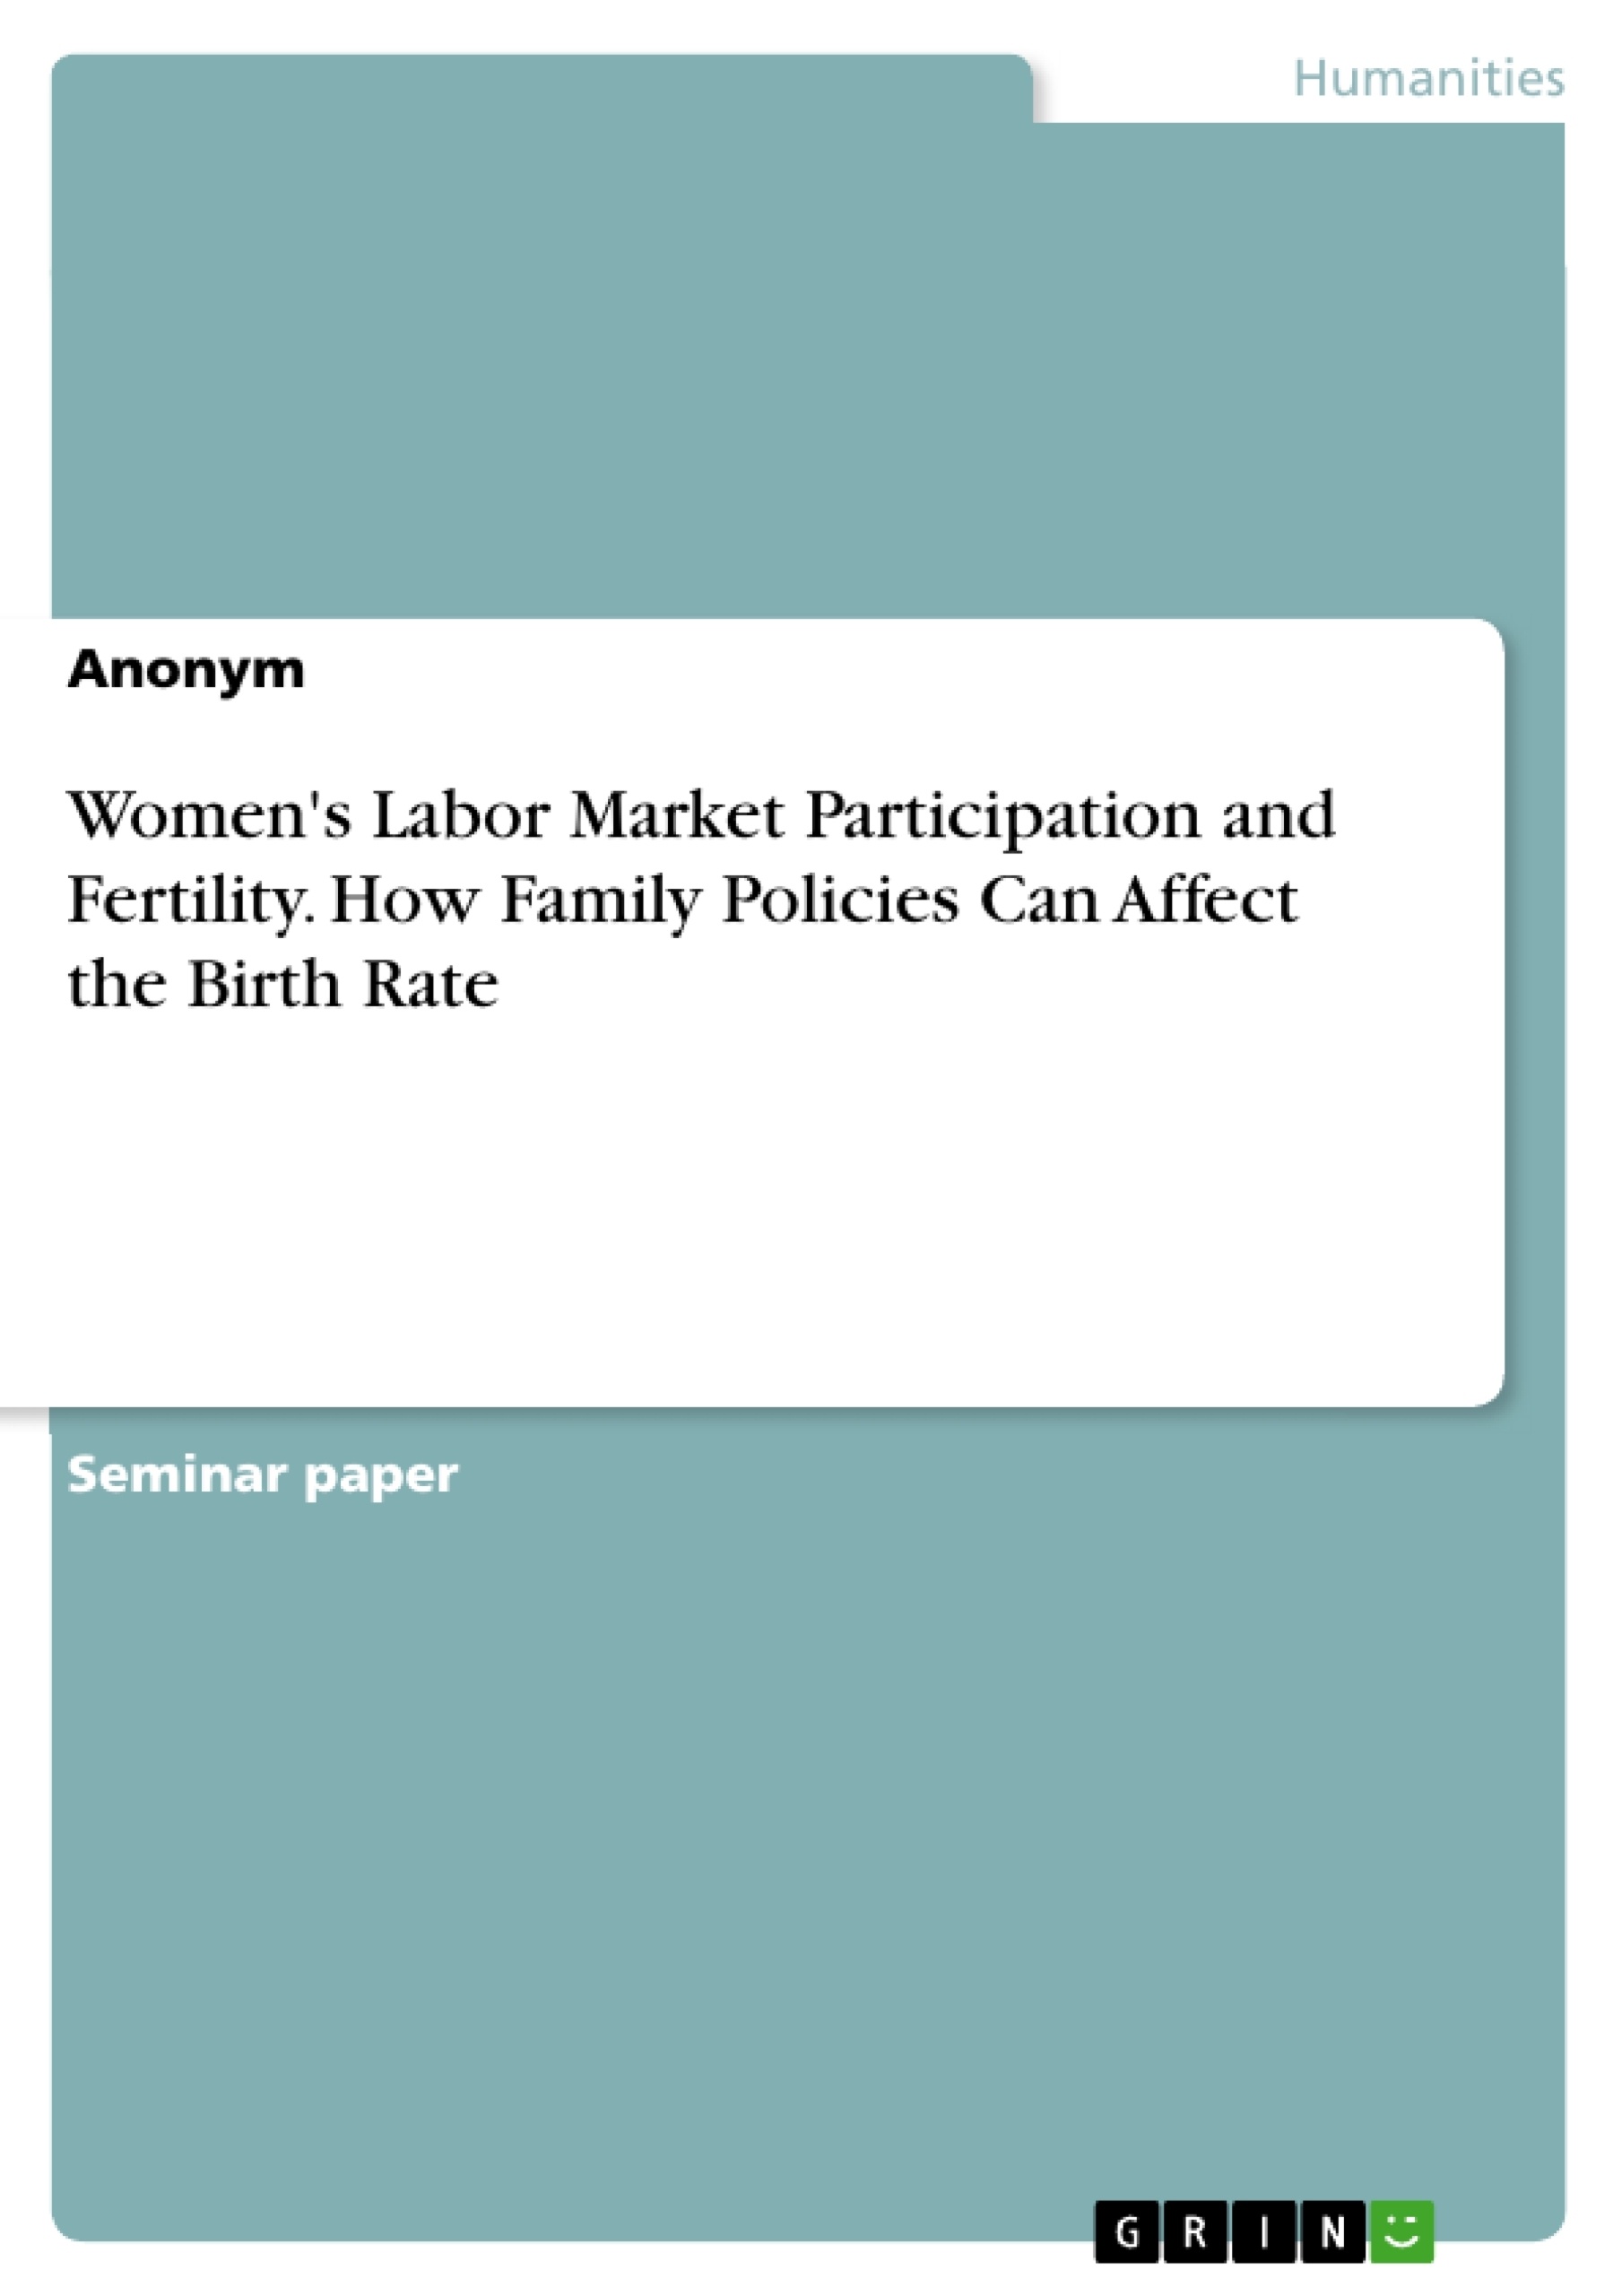 Title: Women's Labor Market Participation and Fertility. How Family Policies Can Affect the Birth Rate